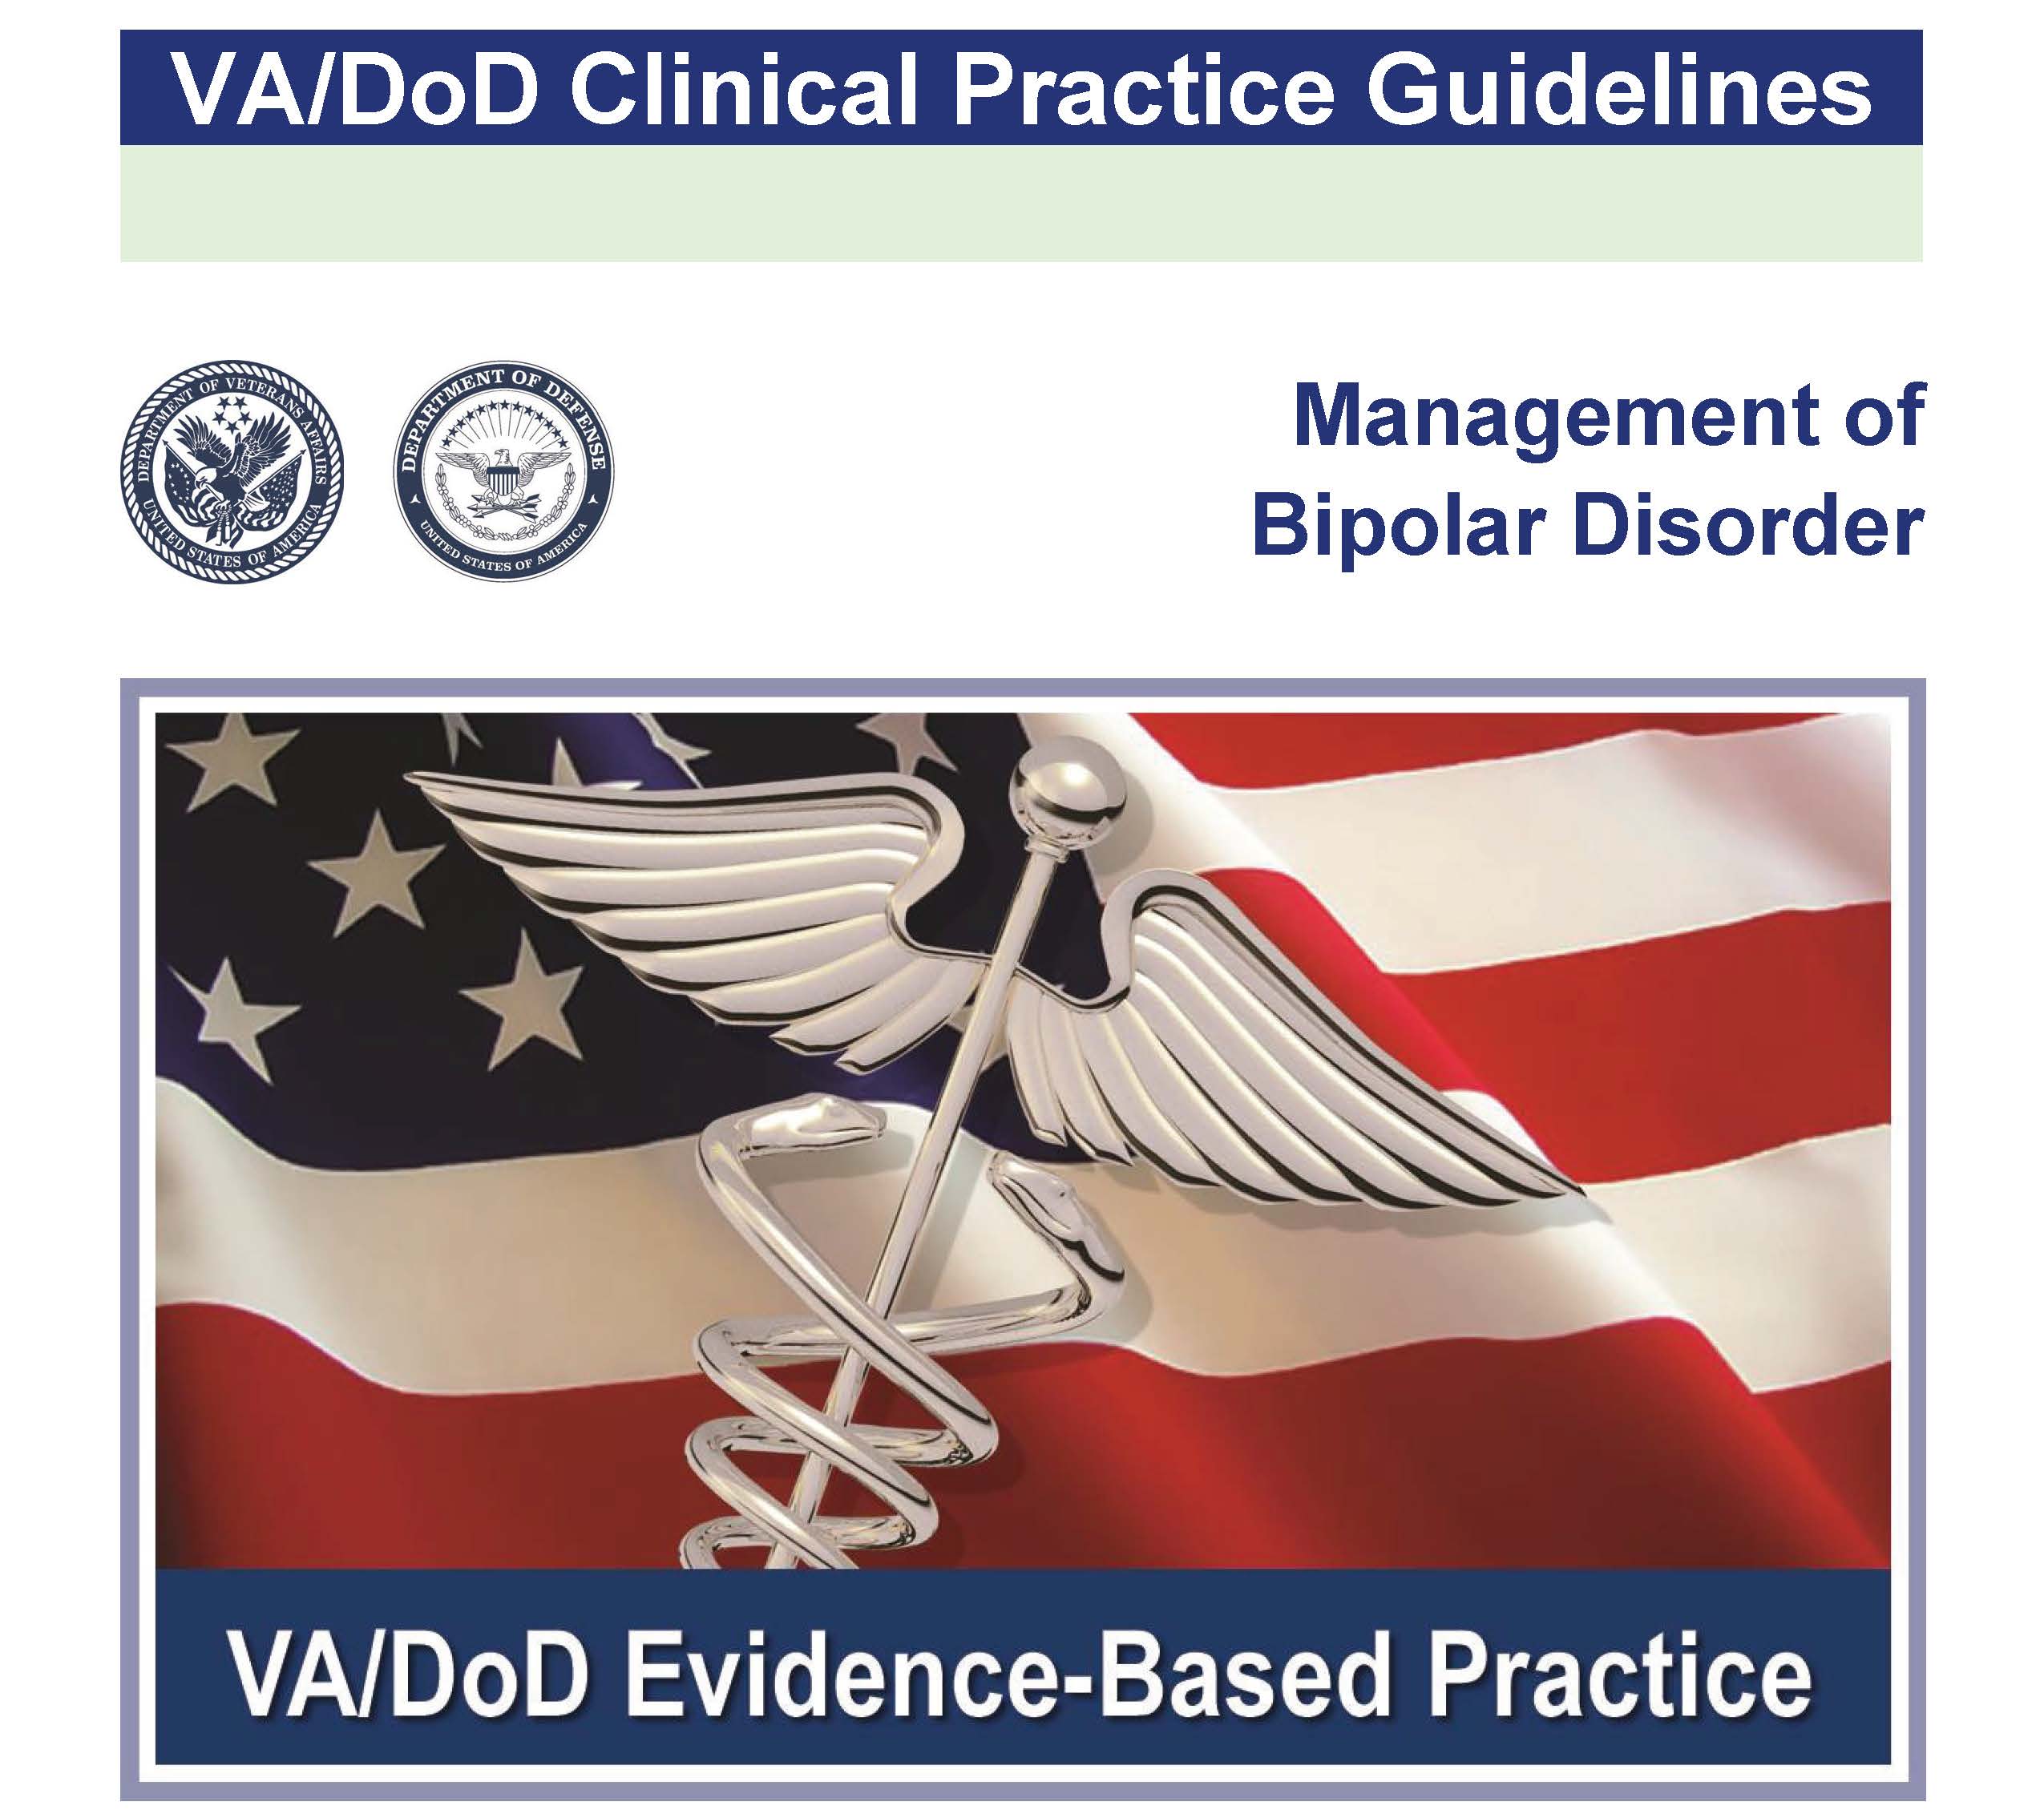 Image of the cover of the VA/DoD Clinical Practice Guideline Management of Bipolar Disorder